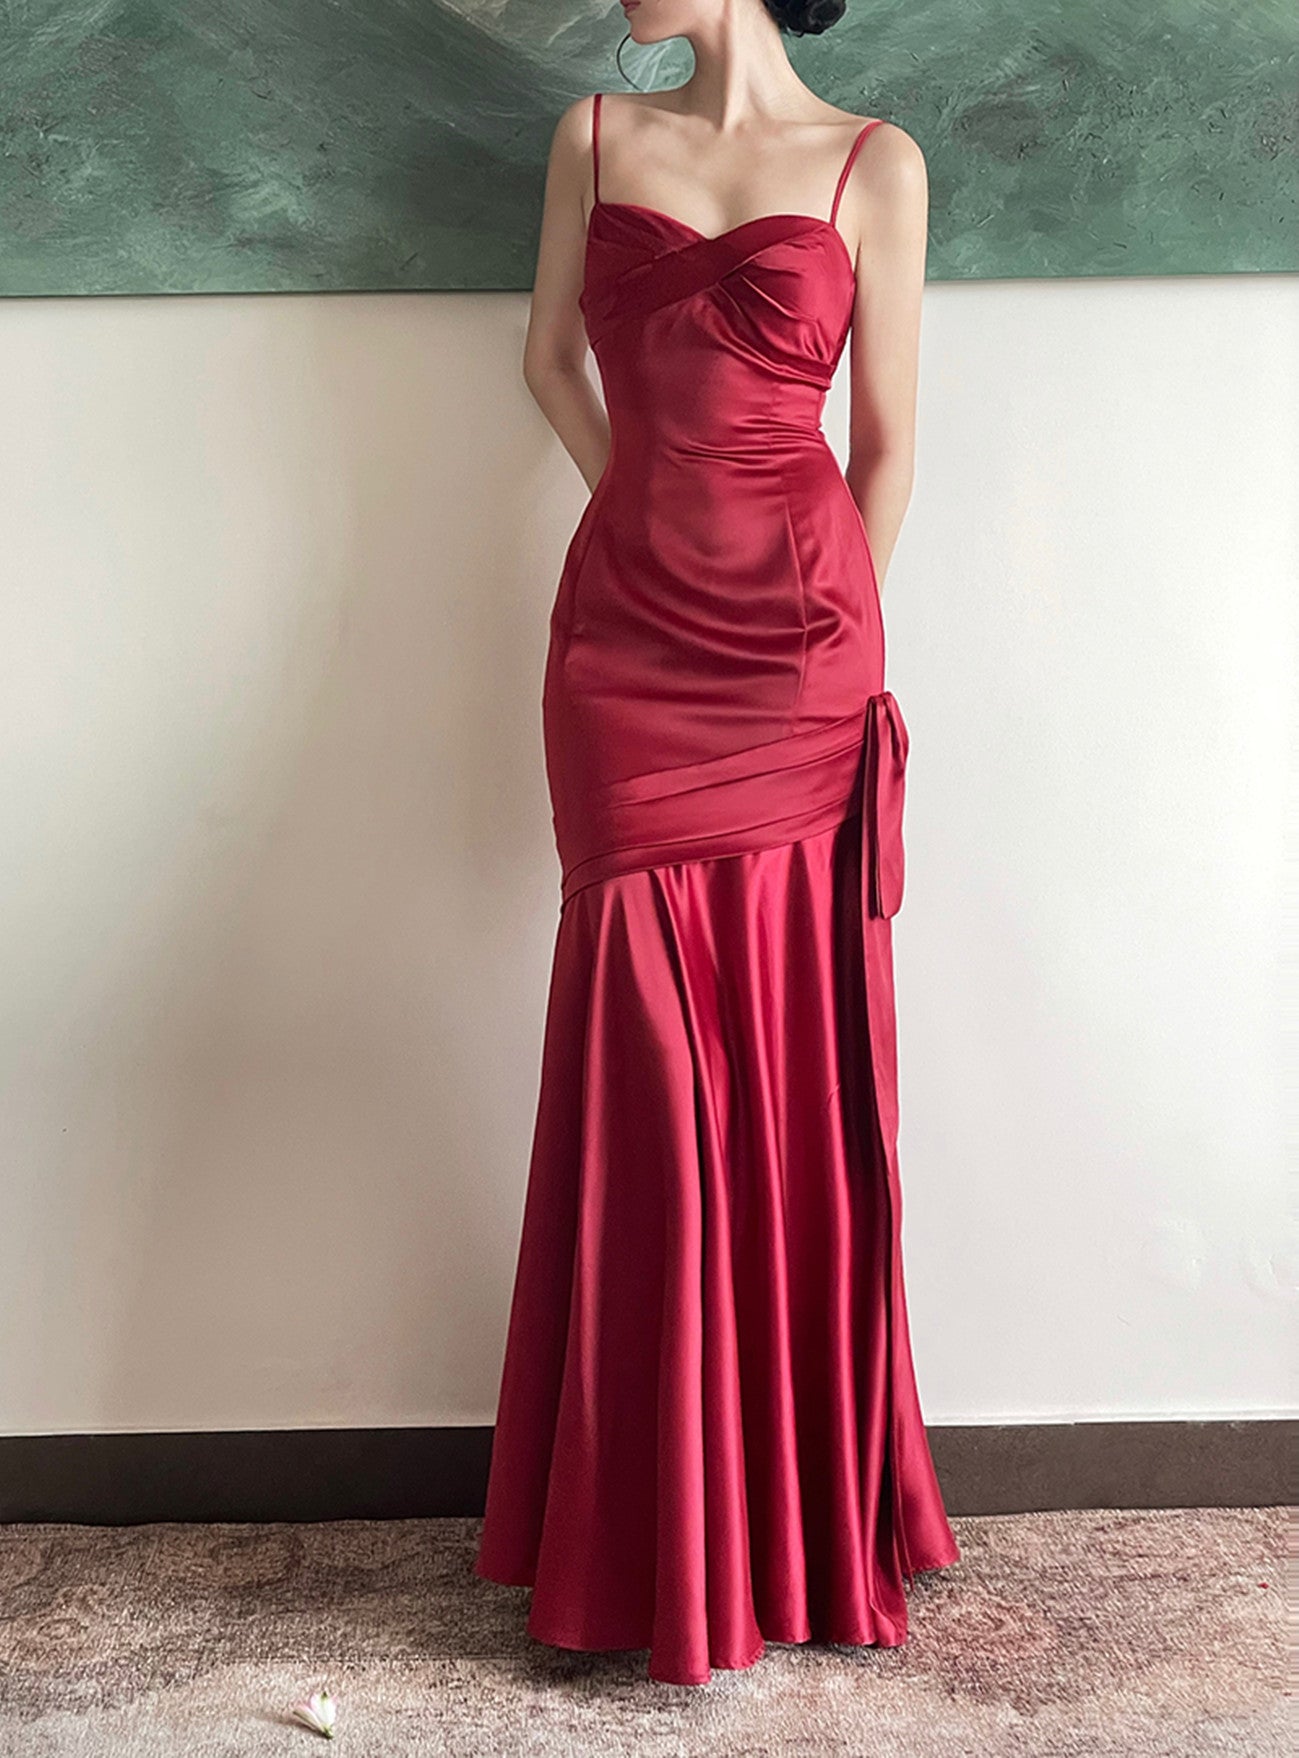 LOVECCRWine Red Satin Sweetheart Straps Prom Dress, Wine Red Long Evening Dress